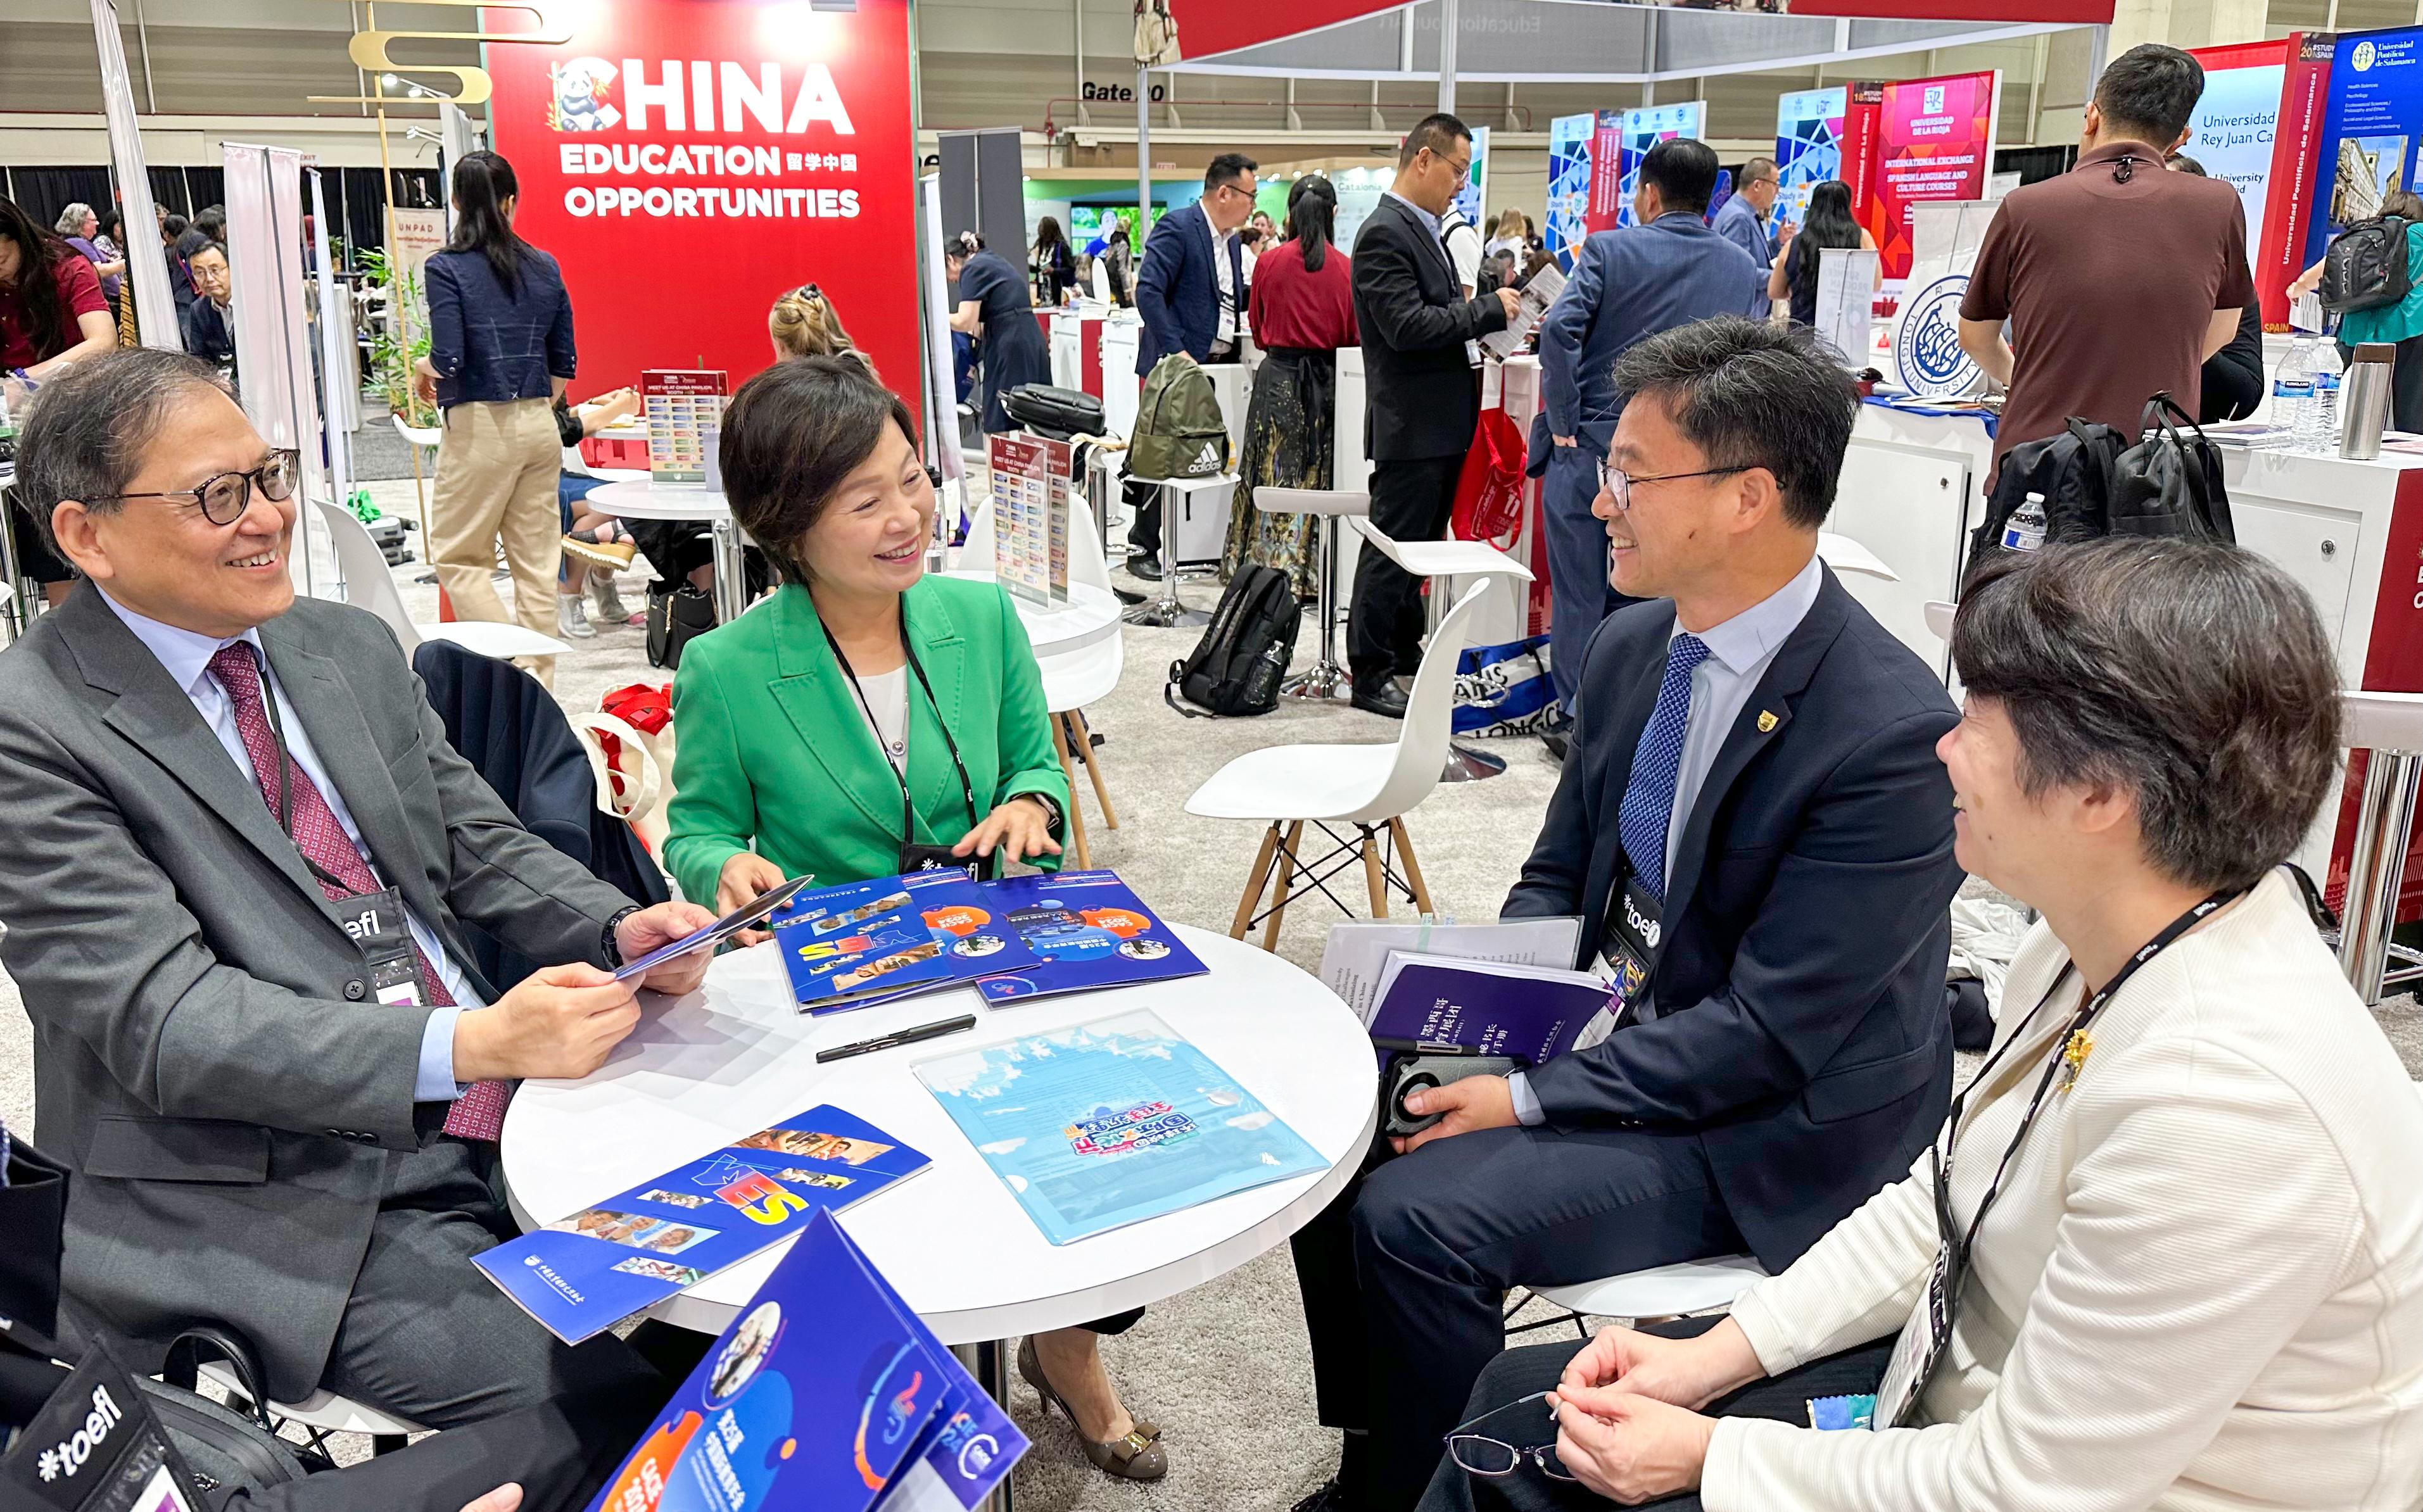 The Secretary for Education, Dr Choi Yuk-lin, visited booths of various countries and regions at the NAFSA Annual Conference & Expo in New Orleans, the United States, on May 29 (New Orleans time). Photo shows Dr Choi (second left) and the Secretary-General of the University Grants Committee, Professor James Tang (first left), chatting with representatives of the China Education Association for International Exchange.